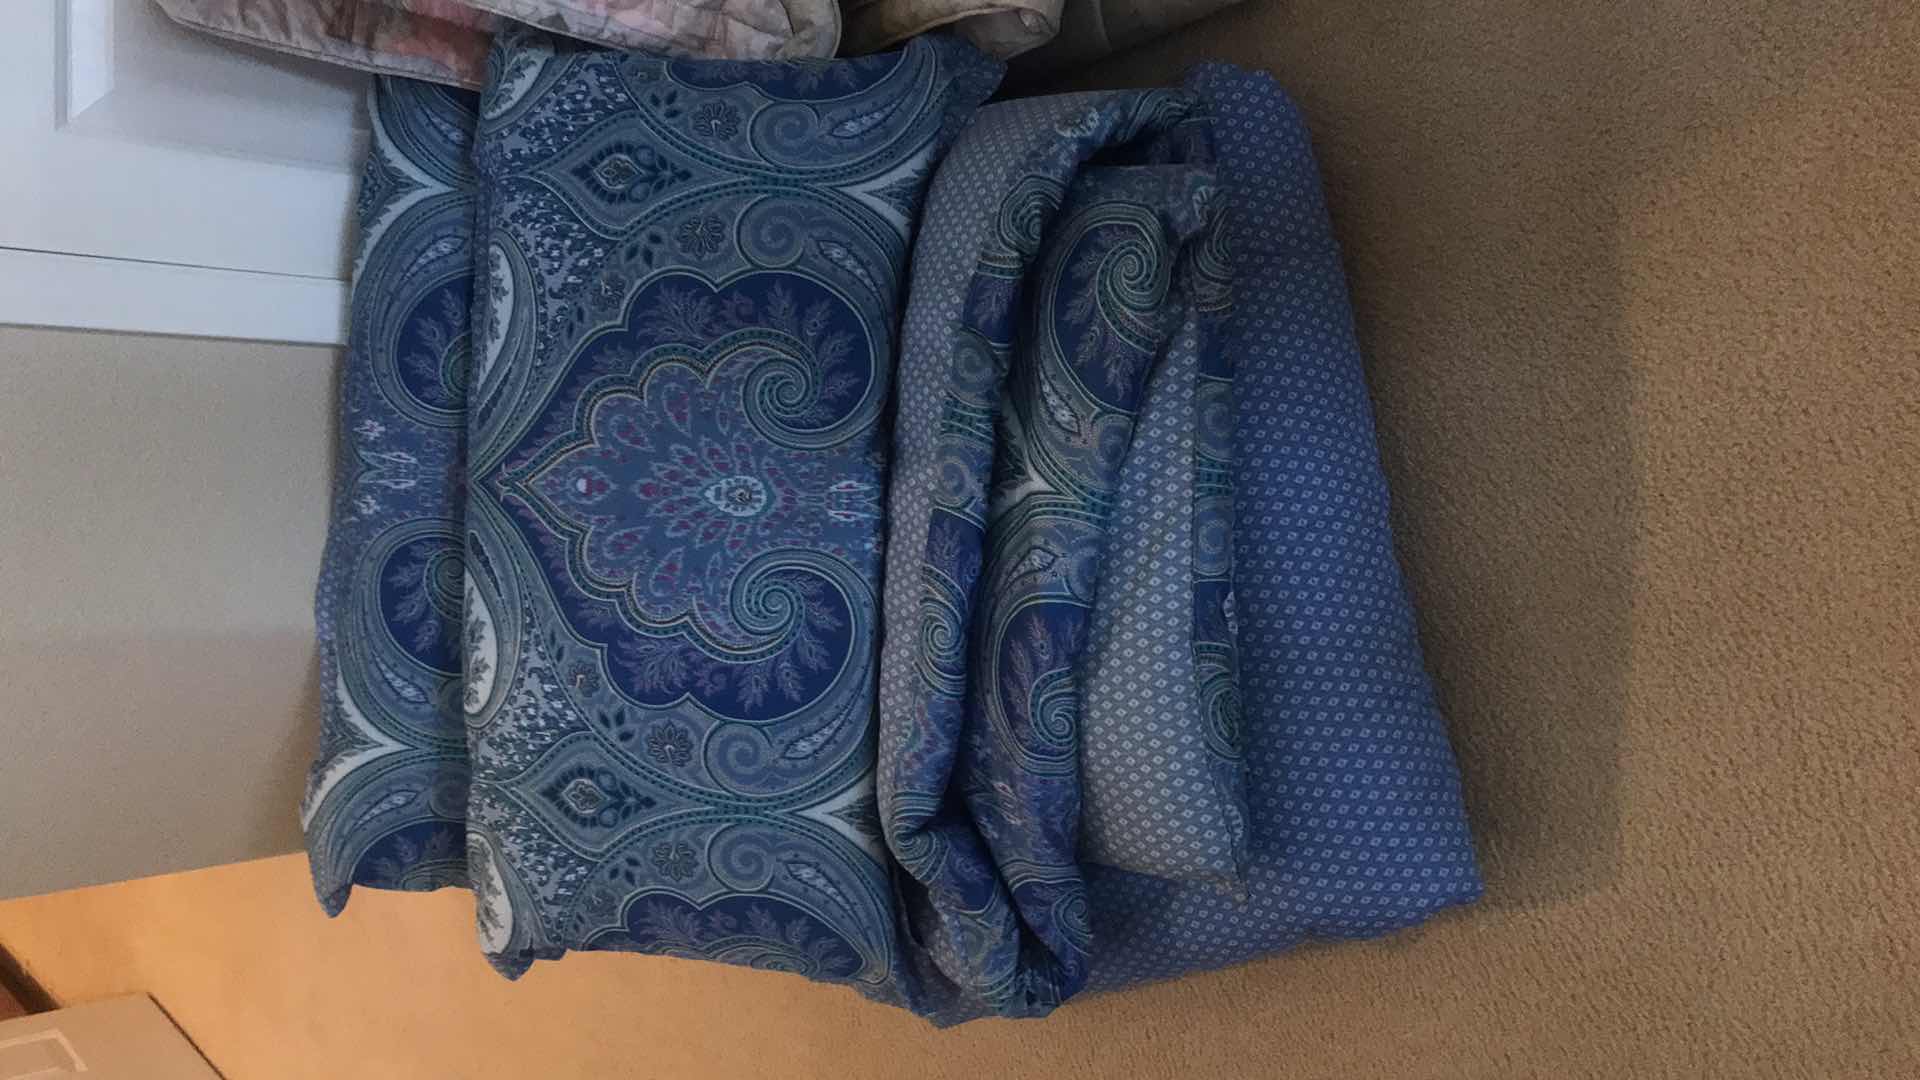 Photo 3 of BLUE KING COMFORTER W PILLOWS AND QUEEN SOUTHWEST COMFORTER W PILLOWS